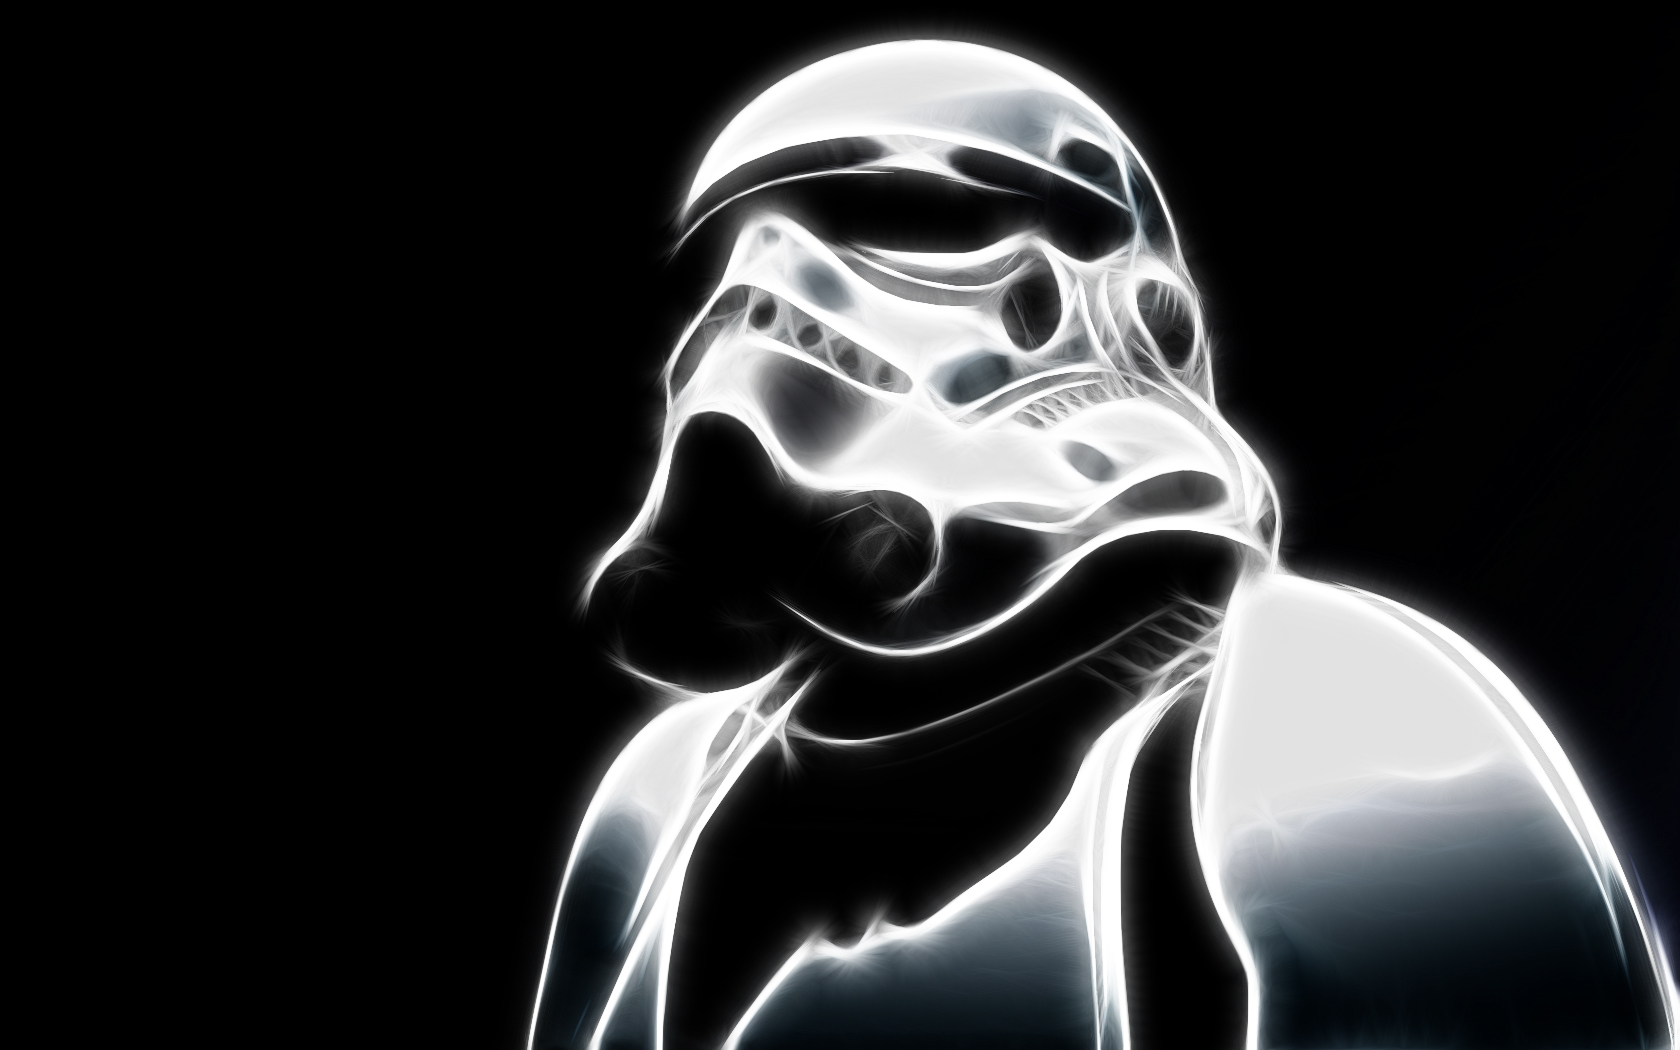 Stormtrooper Res: 1680x1050 / Size:431kb. Views: 87282. More Star Wars wallpapers